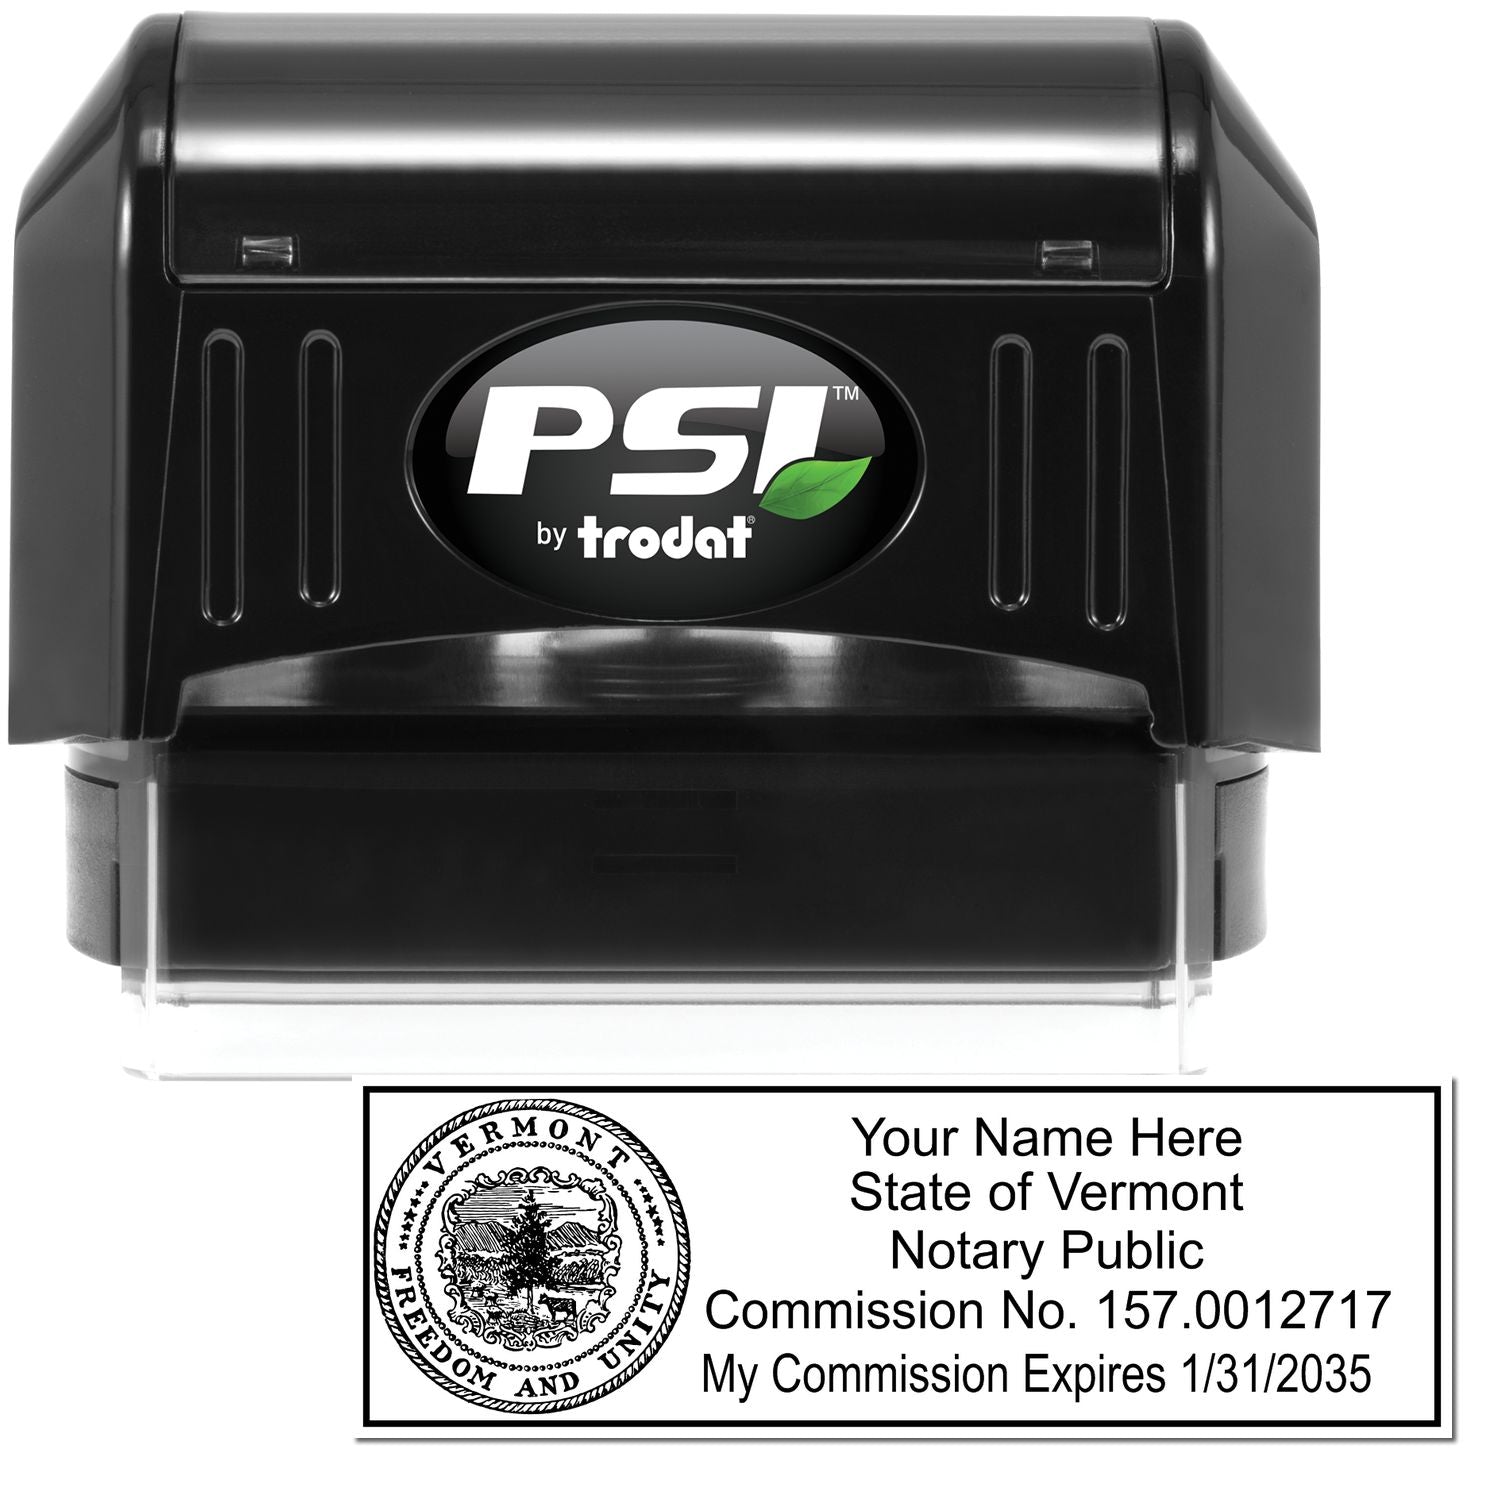 The main image for the PSI Vermont Notary Stamp depicting a sample of the imprint and electronic files